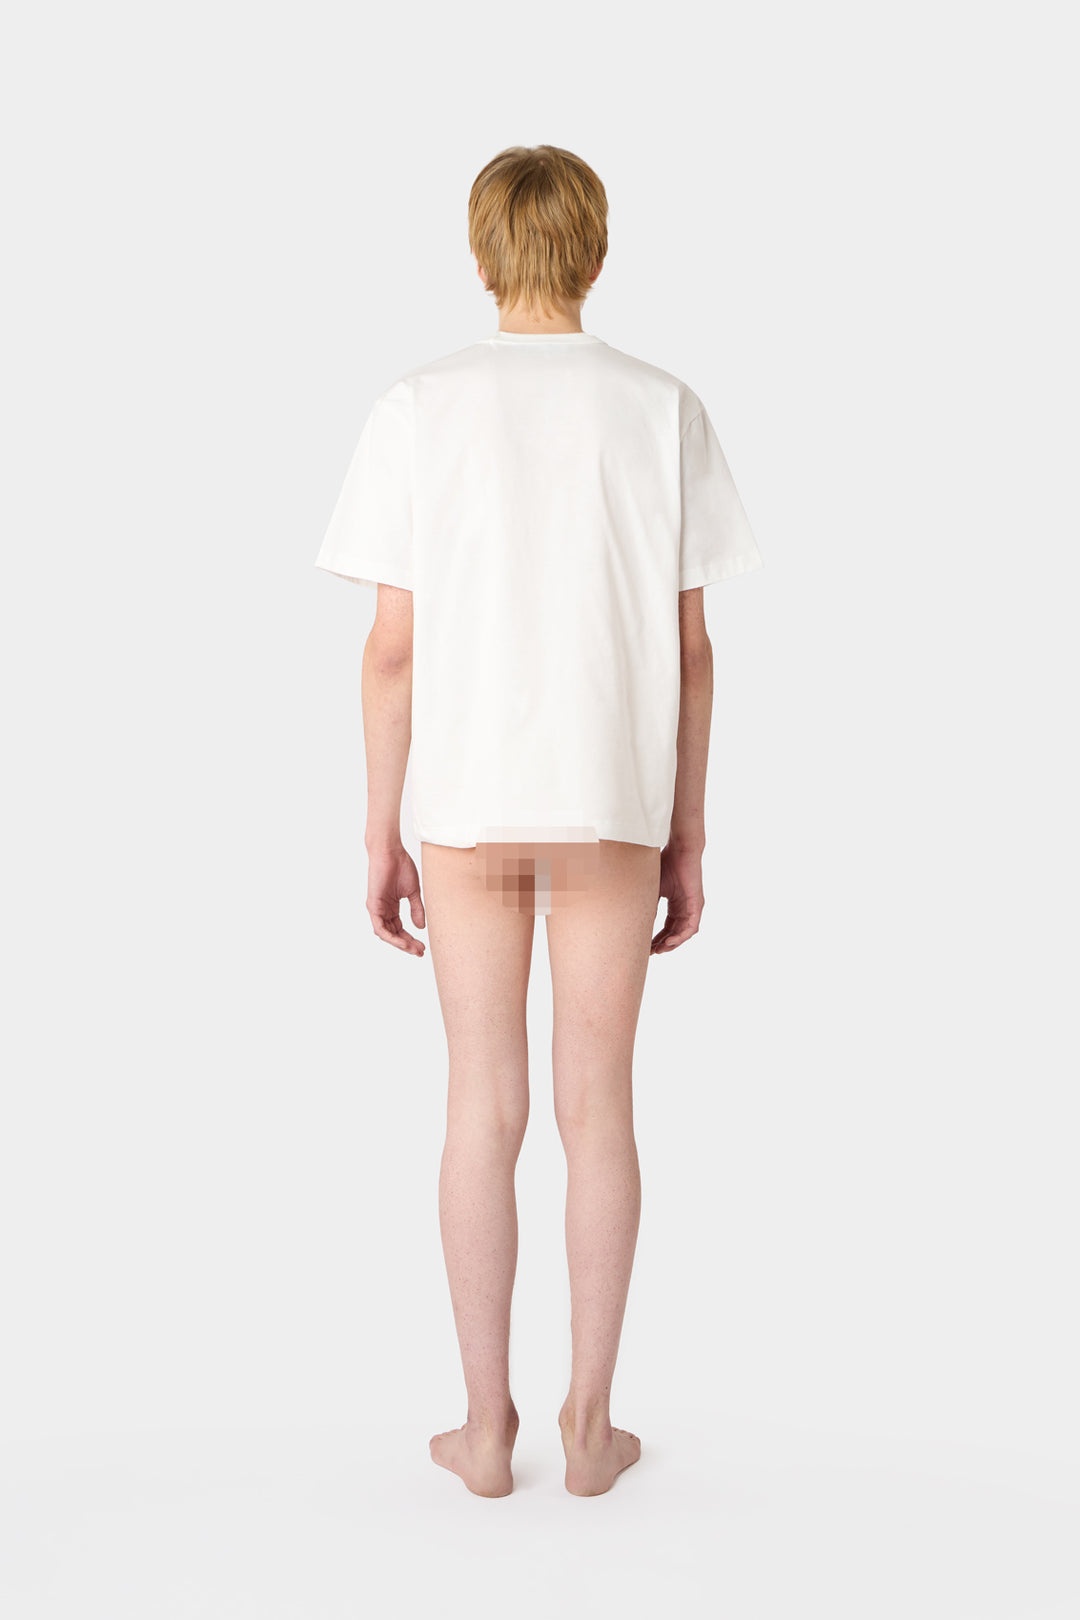 EMBROIDERED BIG LOGO T-SHIRT / off-white & peach - 7